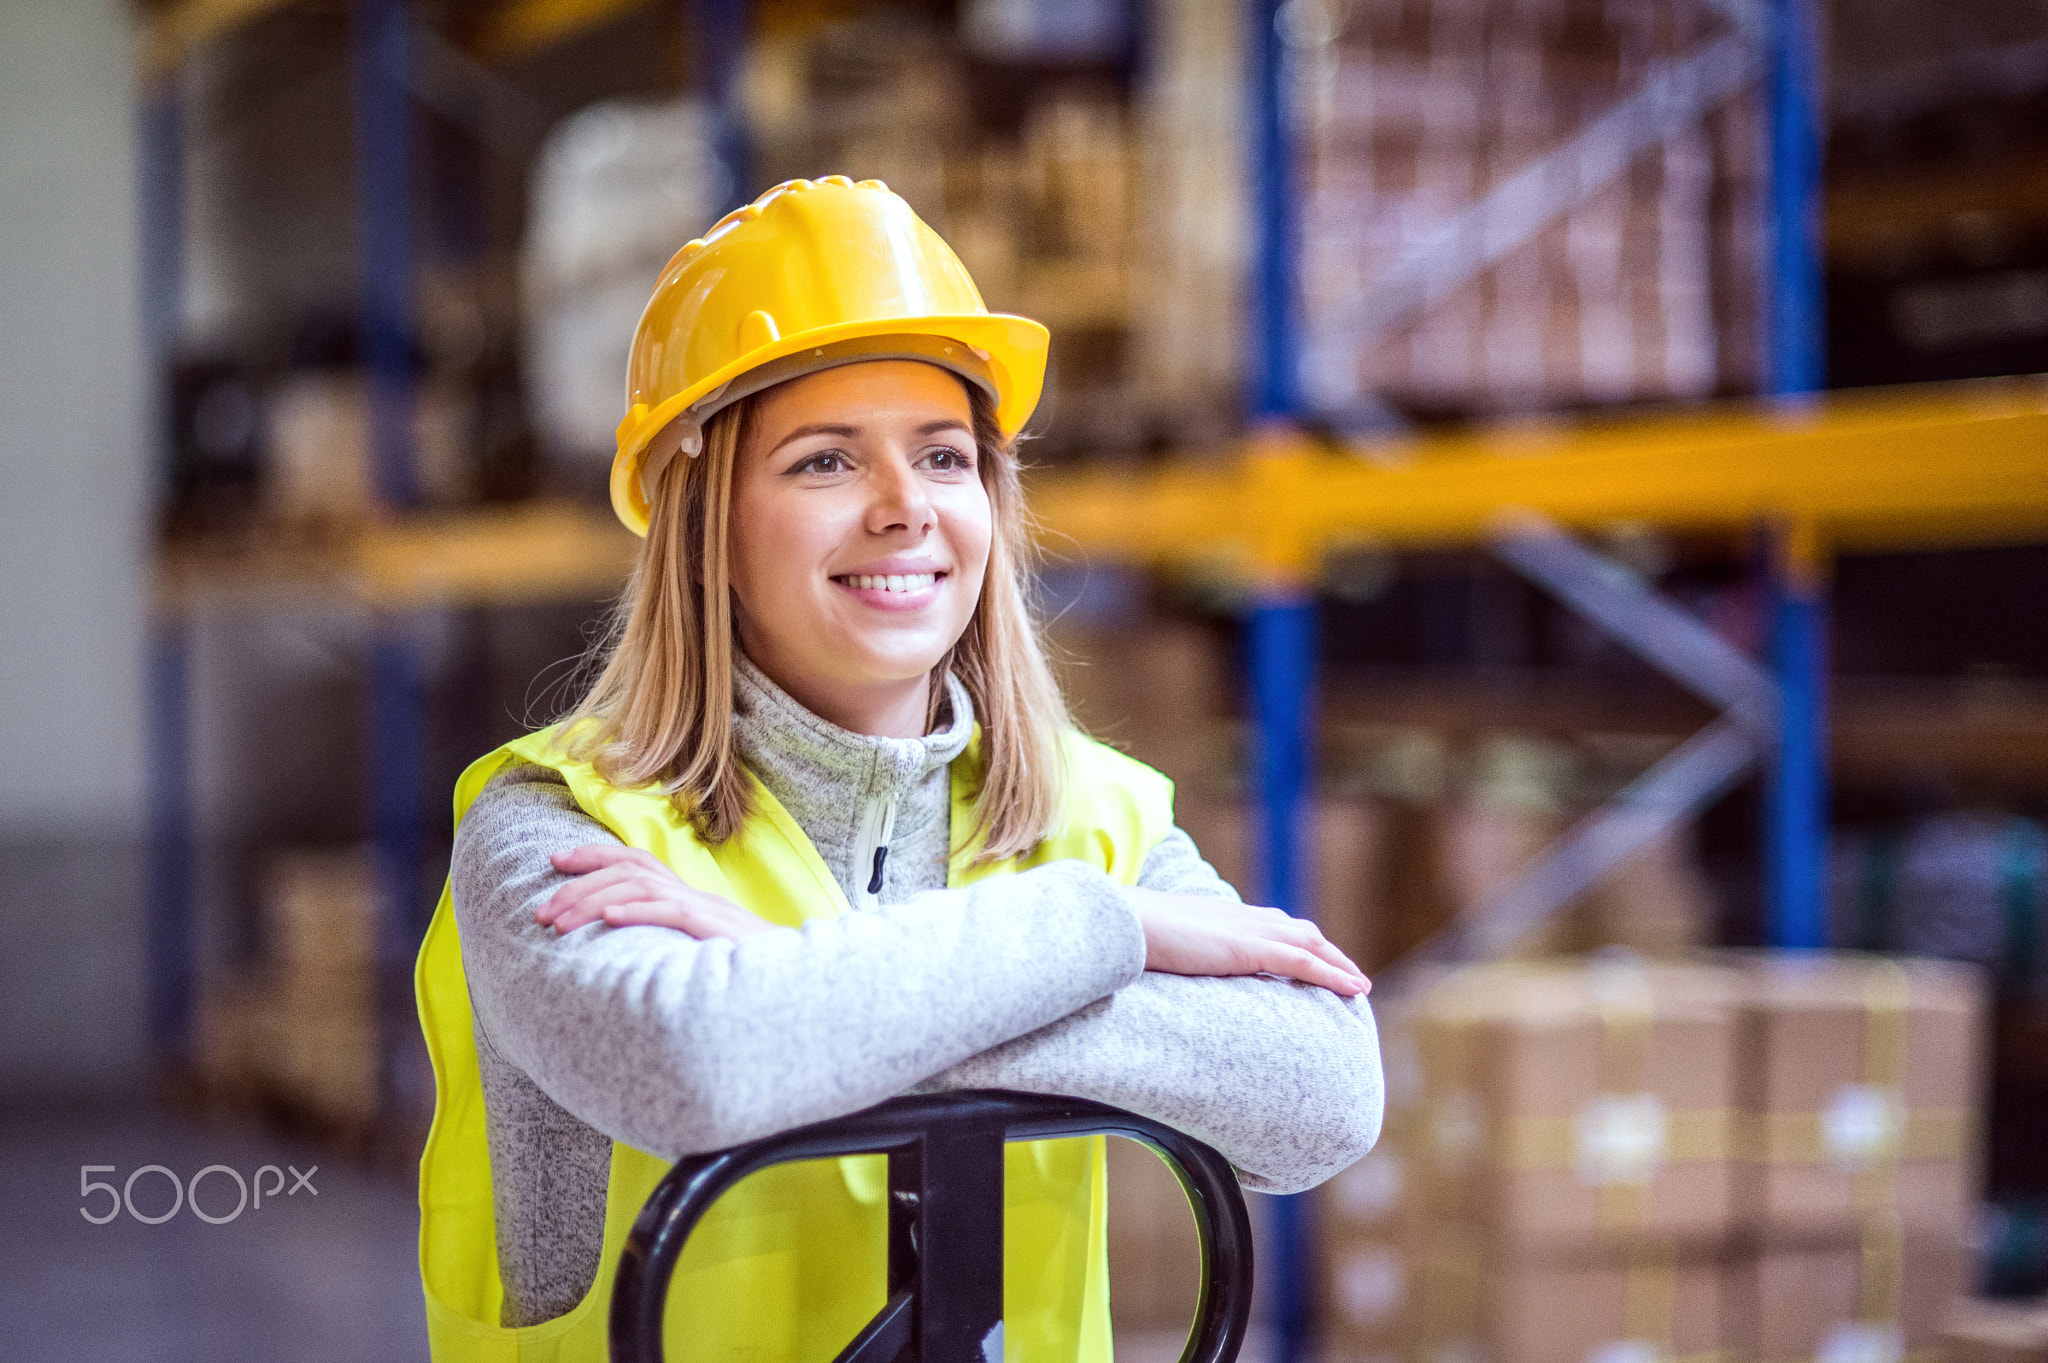 Portrait of a young woman warehouse worker.